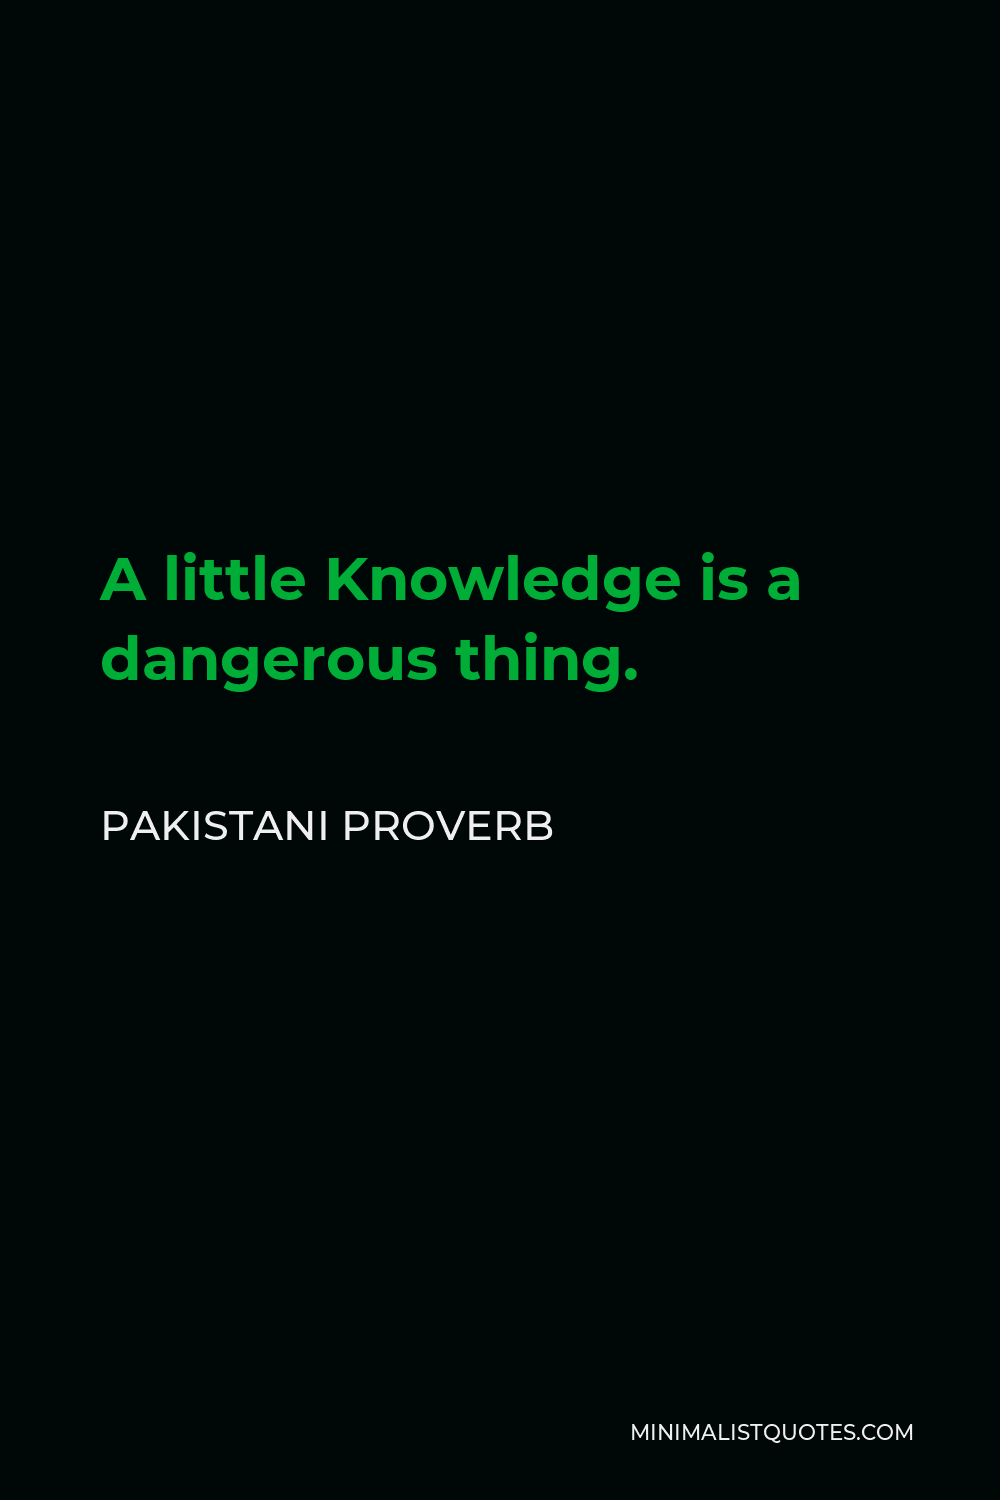 Pakistani Proverb Quote - A little Knowledge is a dangerous thing.